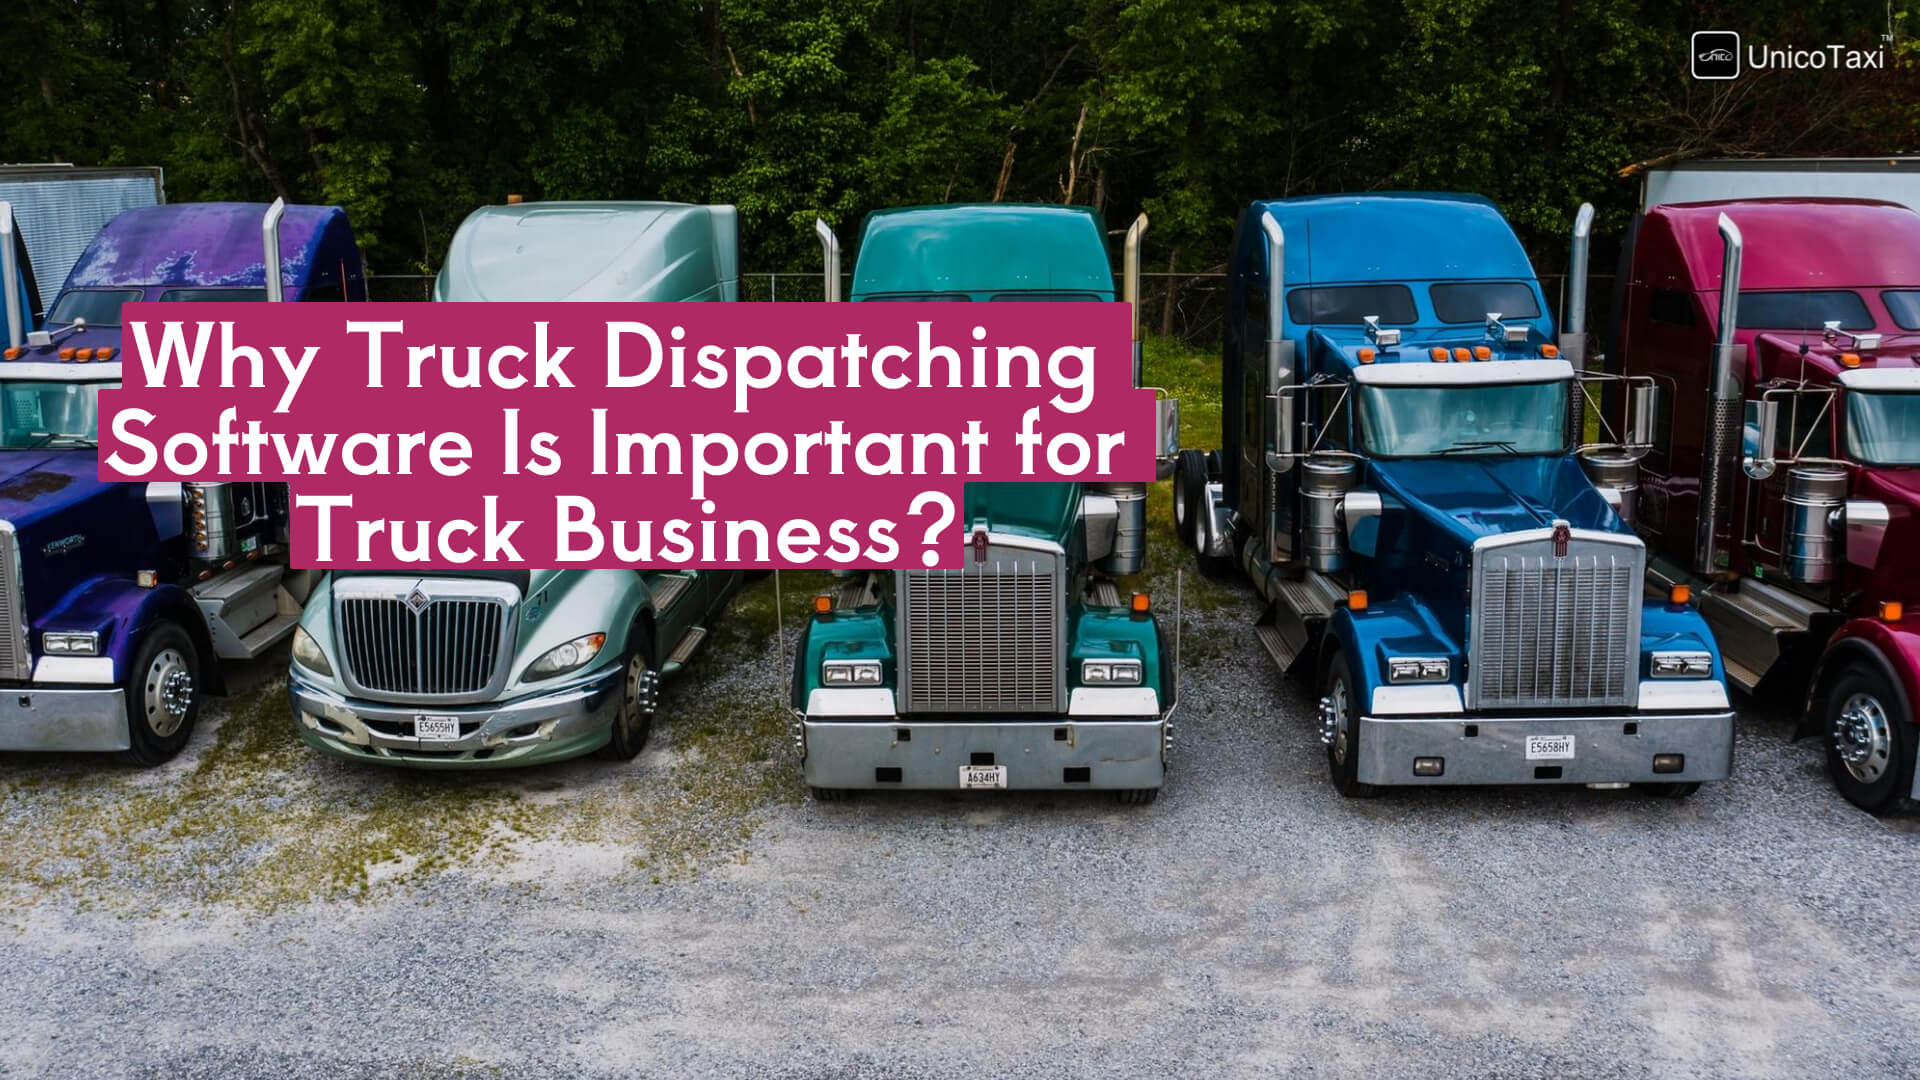 Why Truck Dispatching Software Is Important for Truck Business?